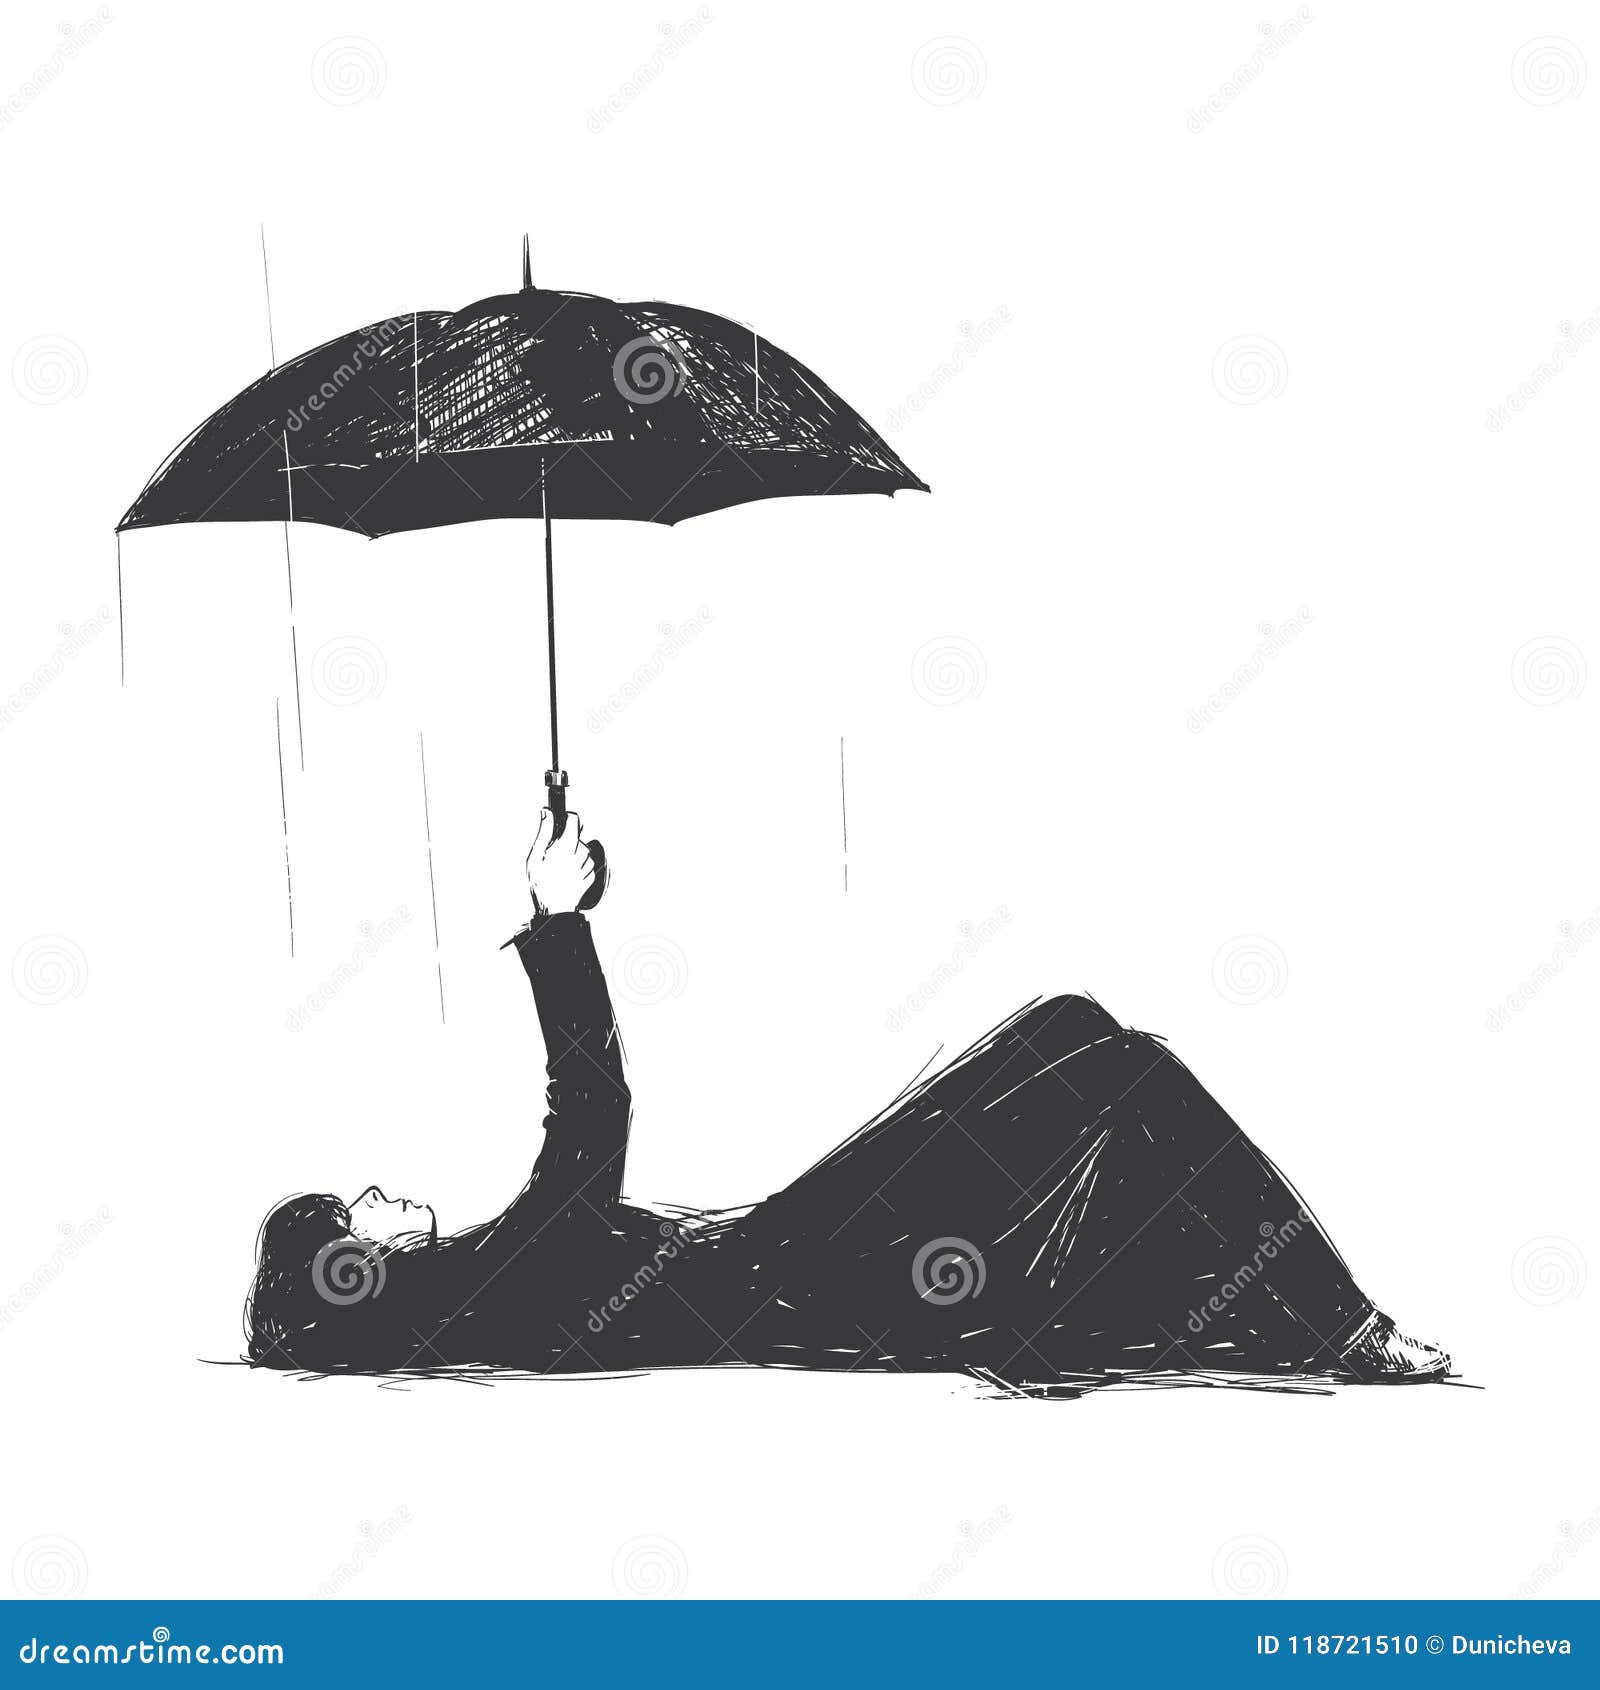 How To Draw Umbrella Pictures | Umbrella Step By Step Drawing Lessons